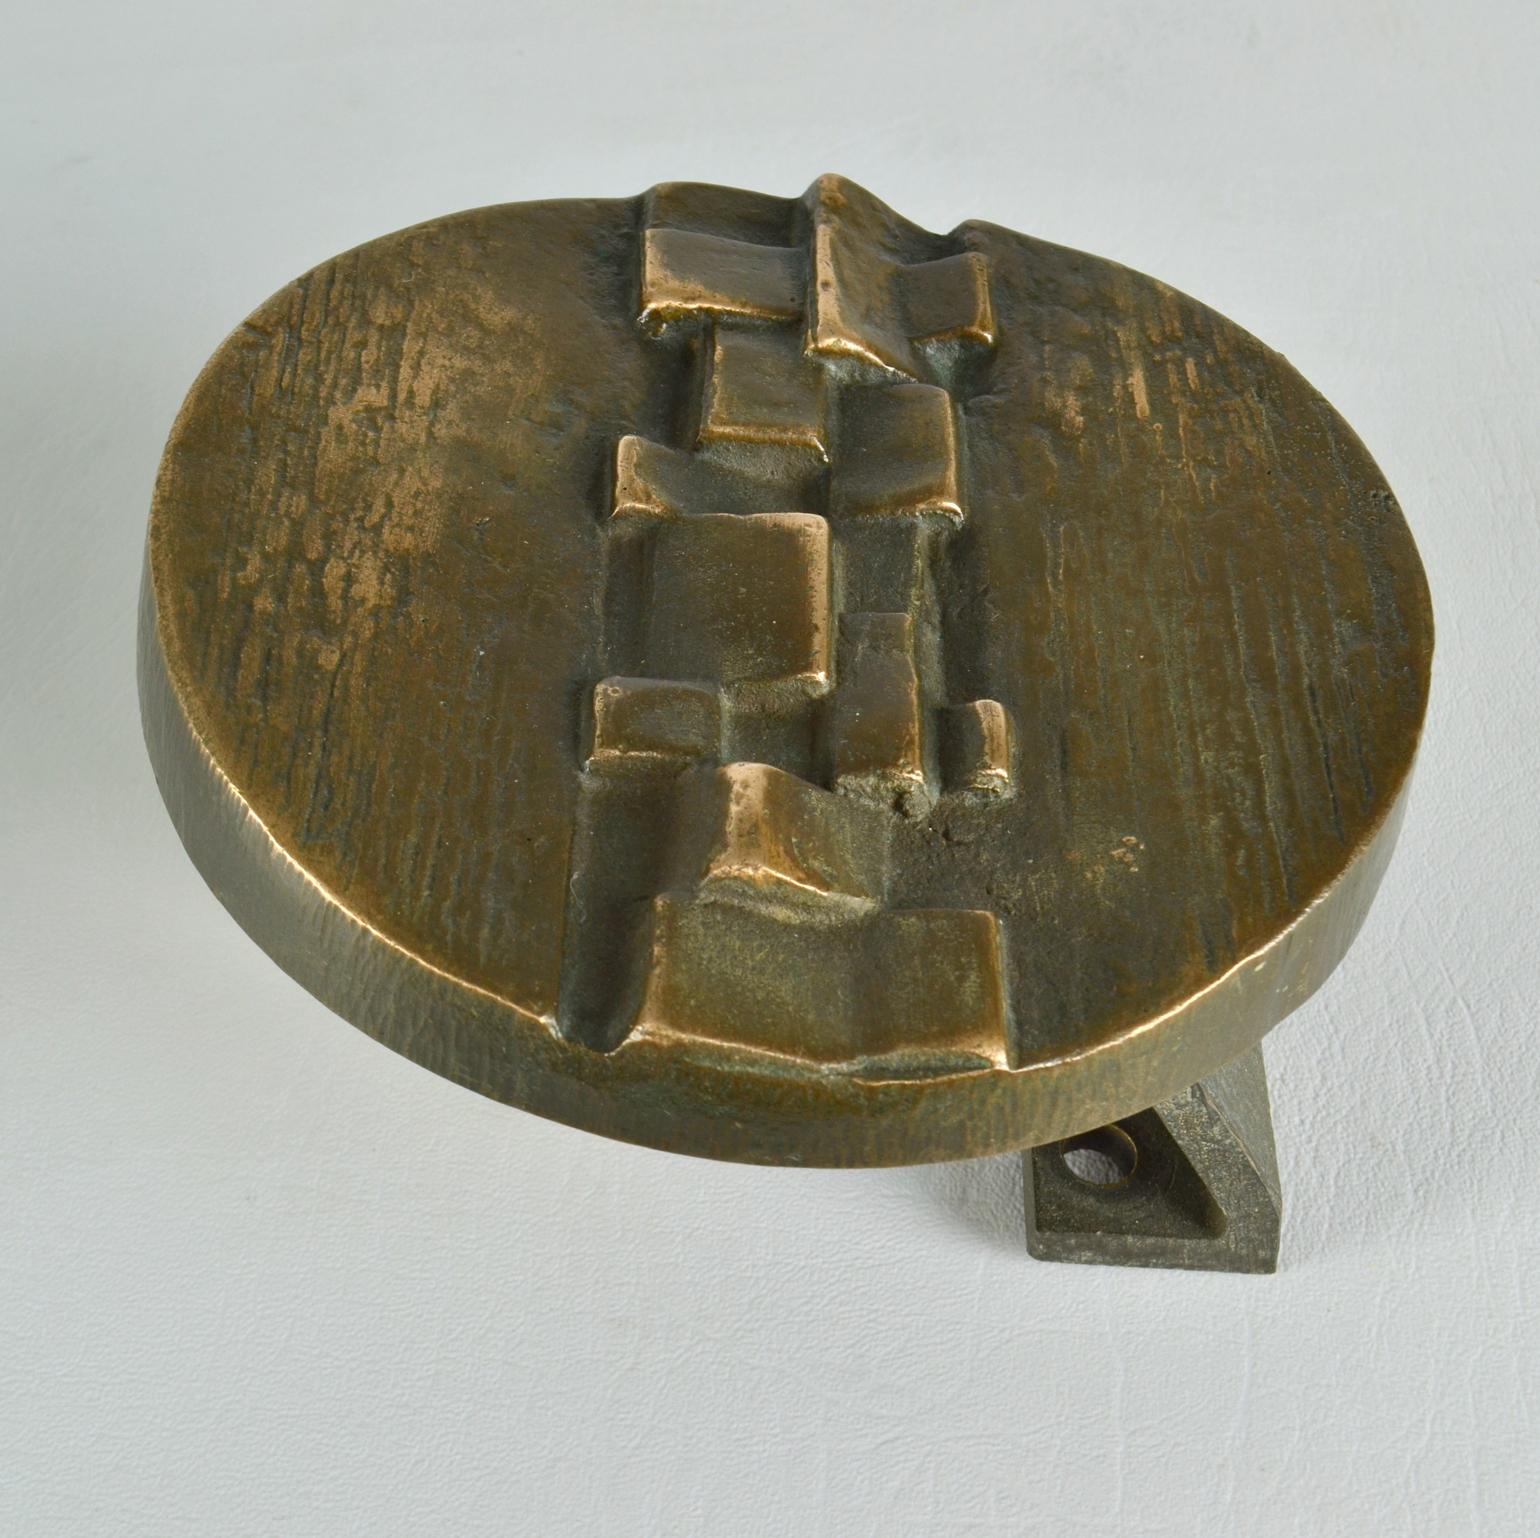 A set round push and pull door handles with strong vertical geometric relief are like door sculptures with original patinas, produced in the 1970's.
The identical handles to be applied on double doors together or on a single door on opposite sides.